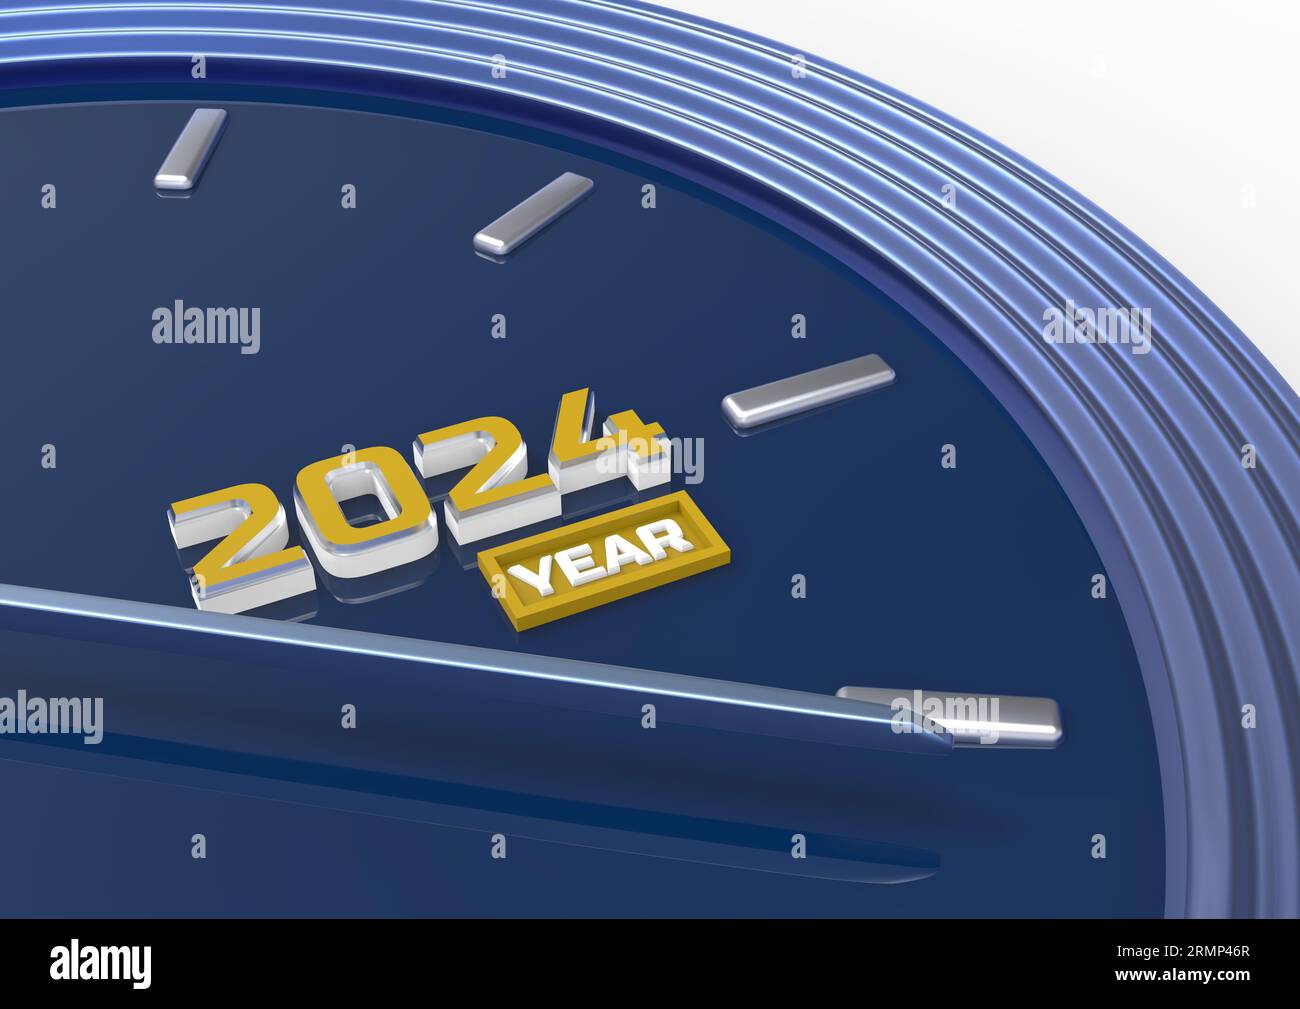 Clock face showing the new or current year 2024. The hour or minute